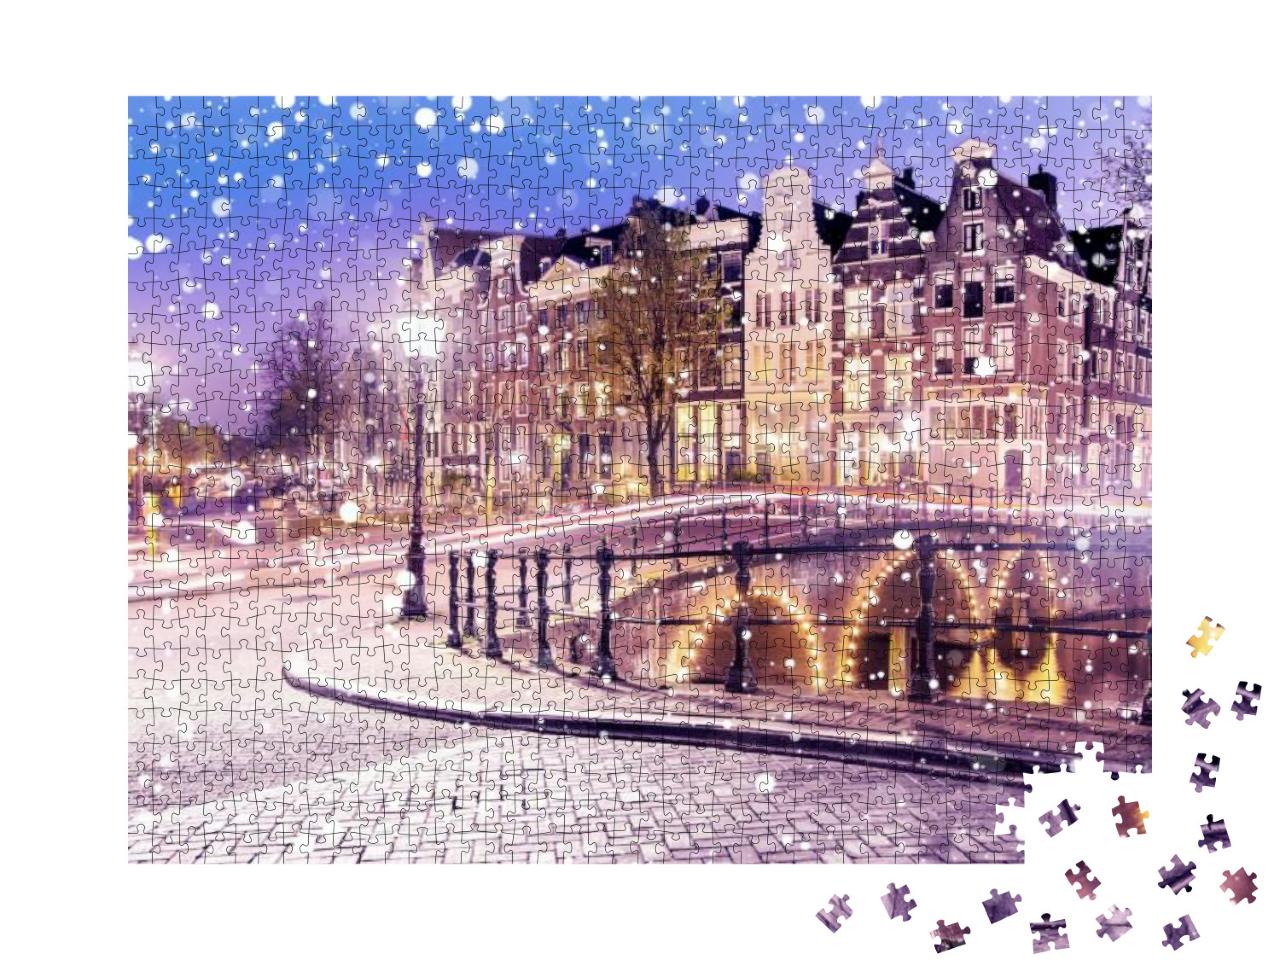 Traditional Dutch Old Houses & Bridges on the Canals in A... Jigsaw Puzzle with 1000 pieces